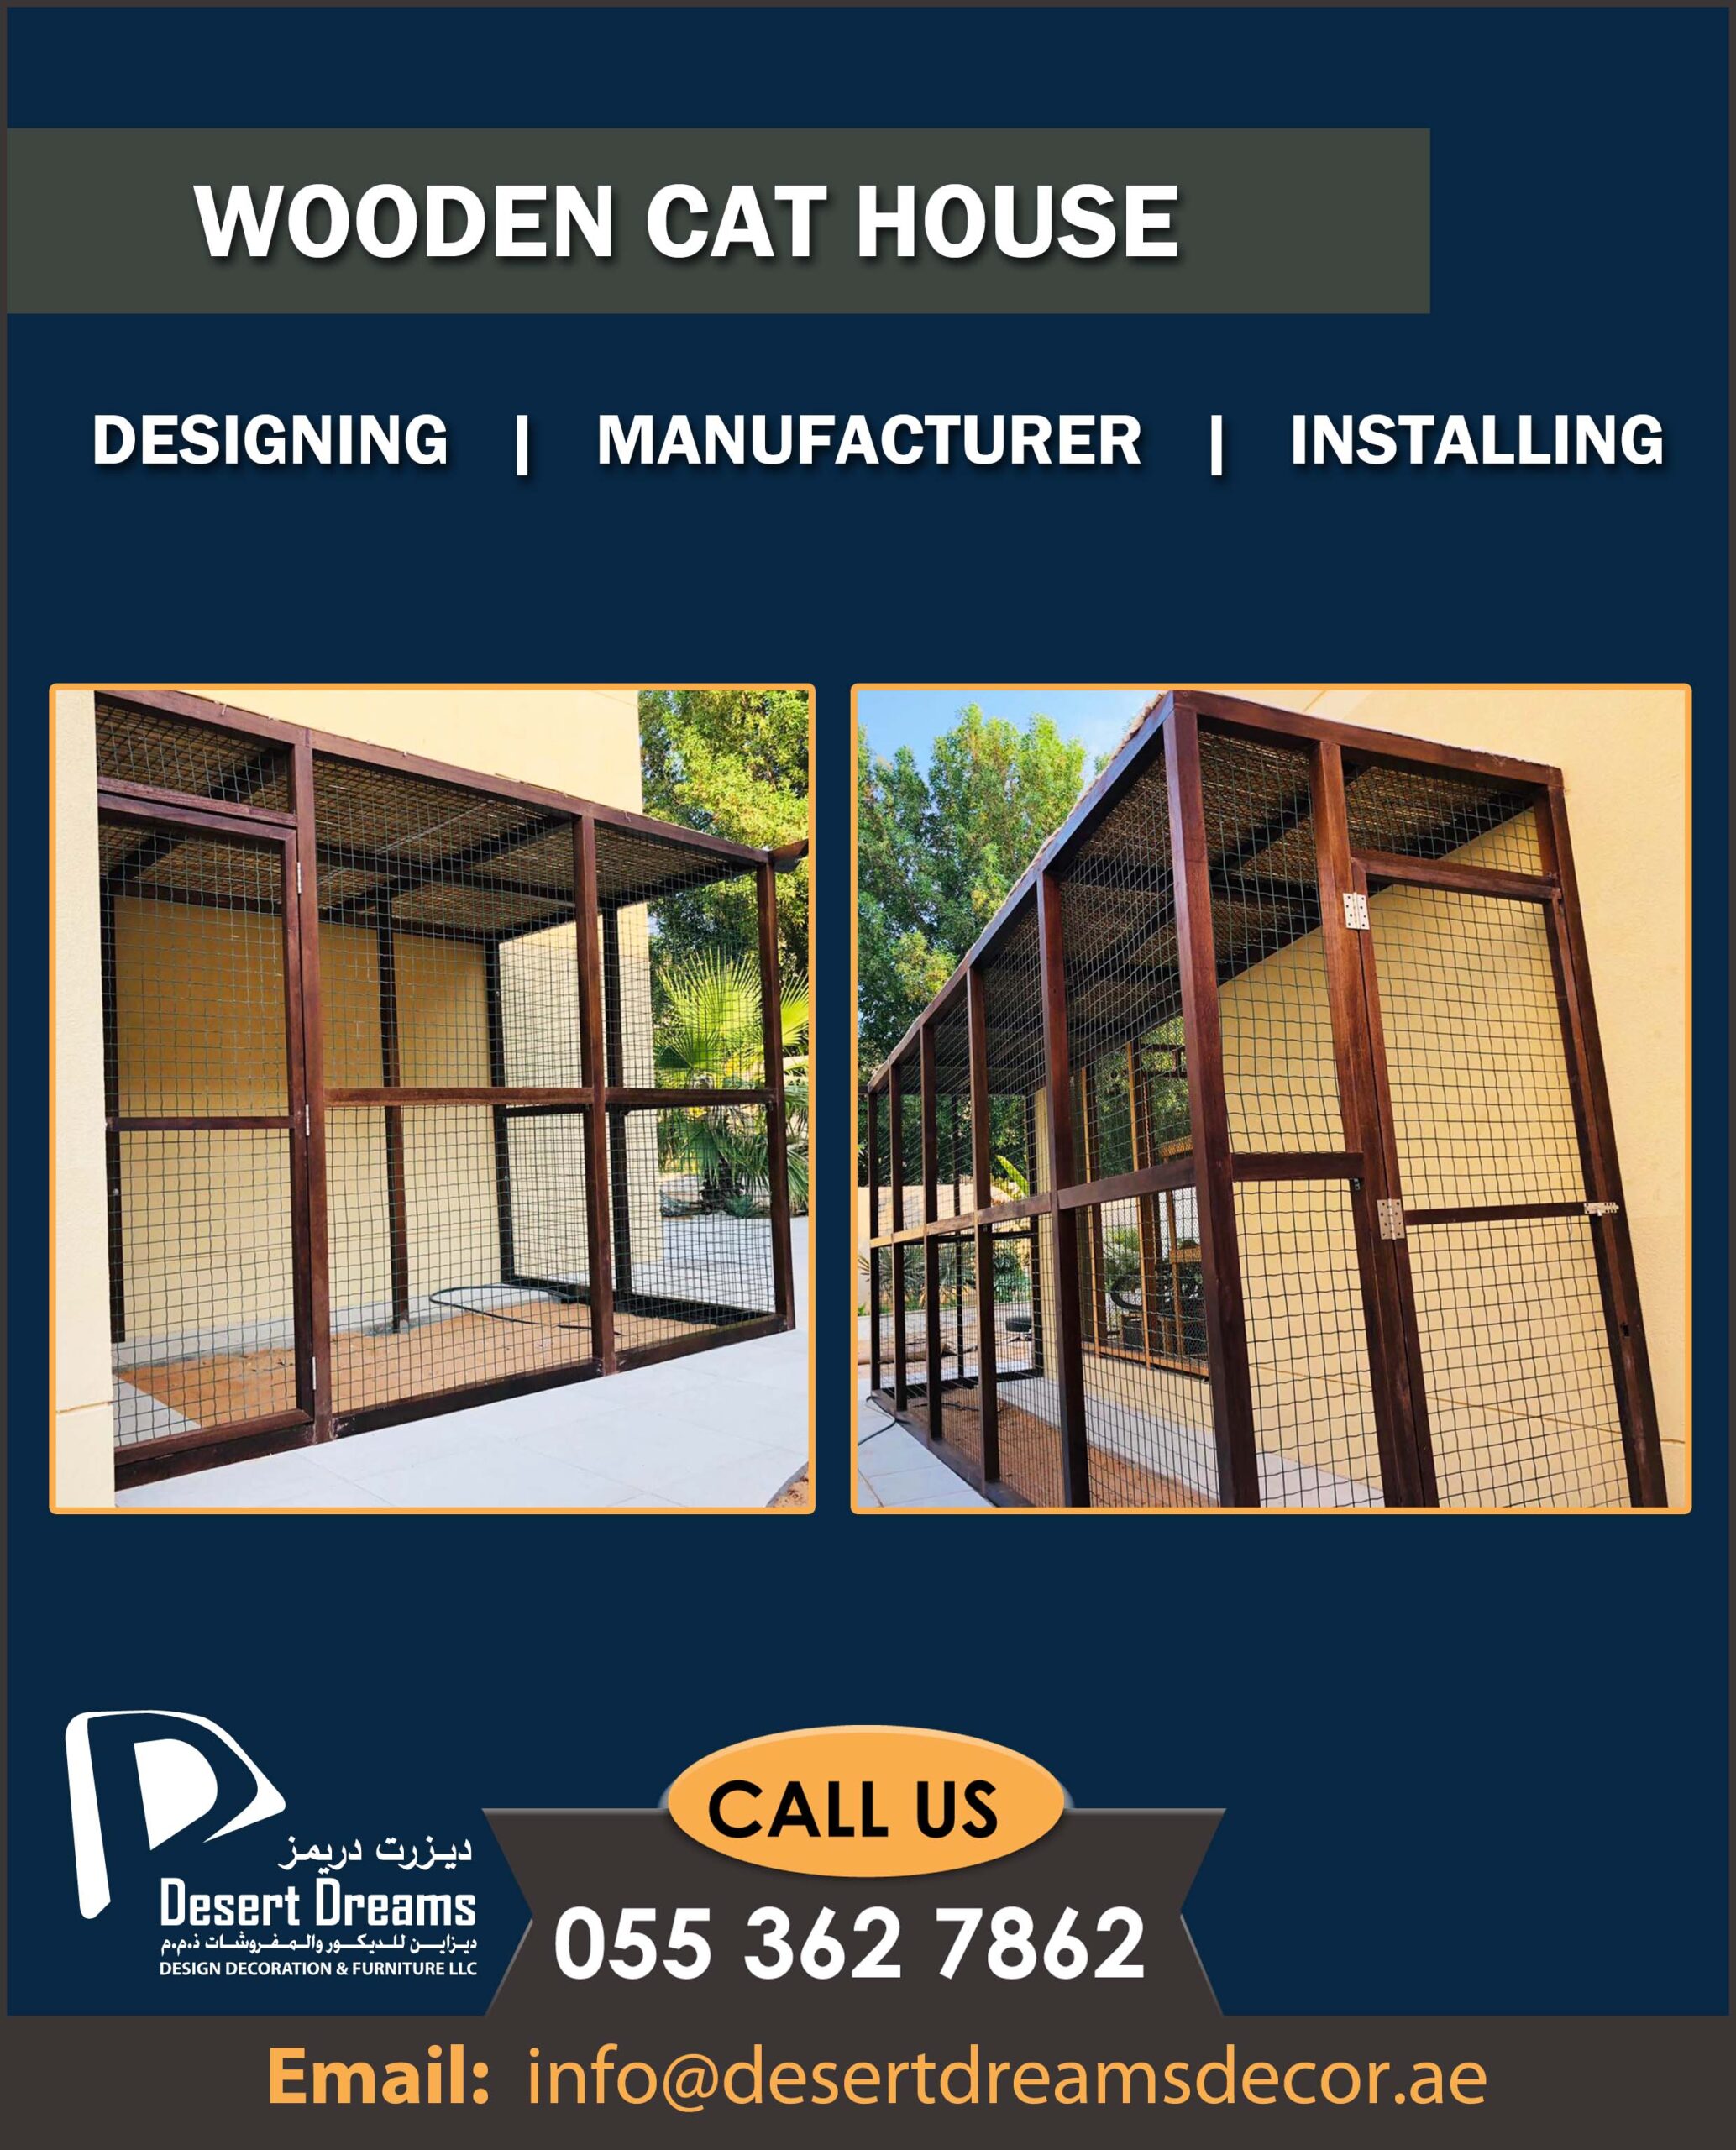 Wooden Cat House | Wooden Dog House | Manufacturer | Suppliers.